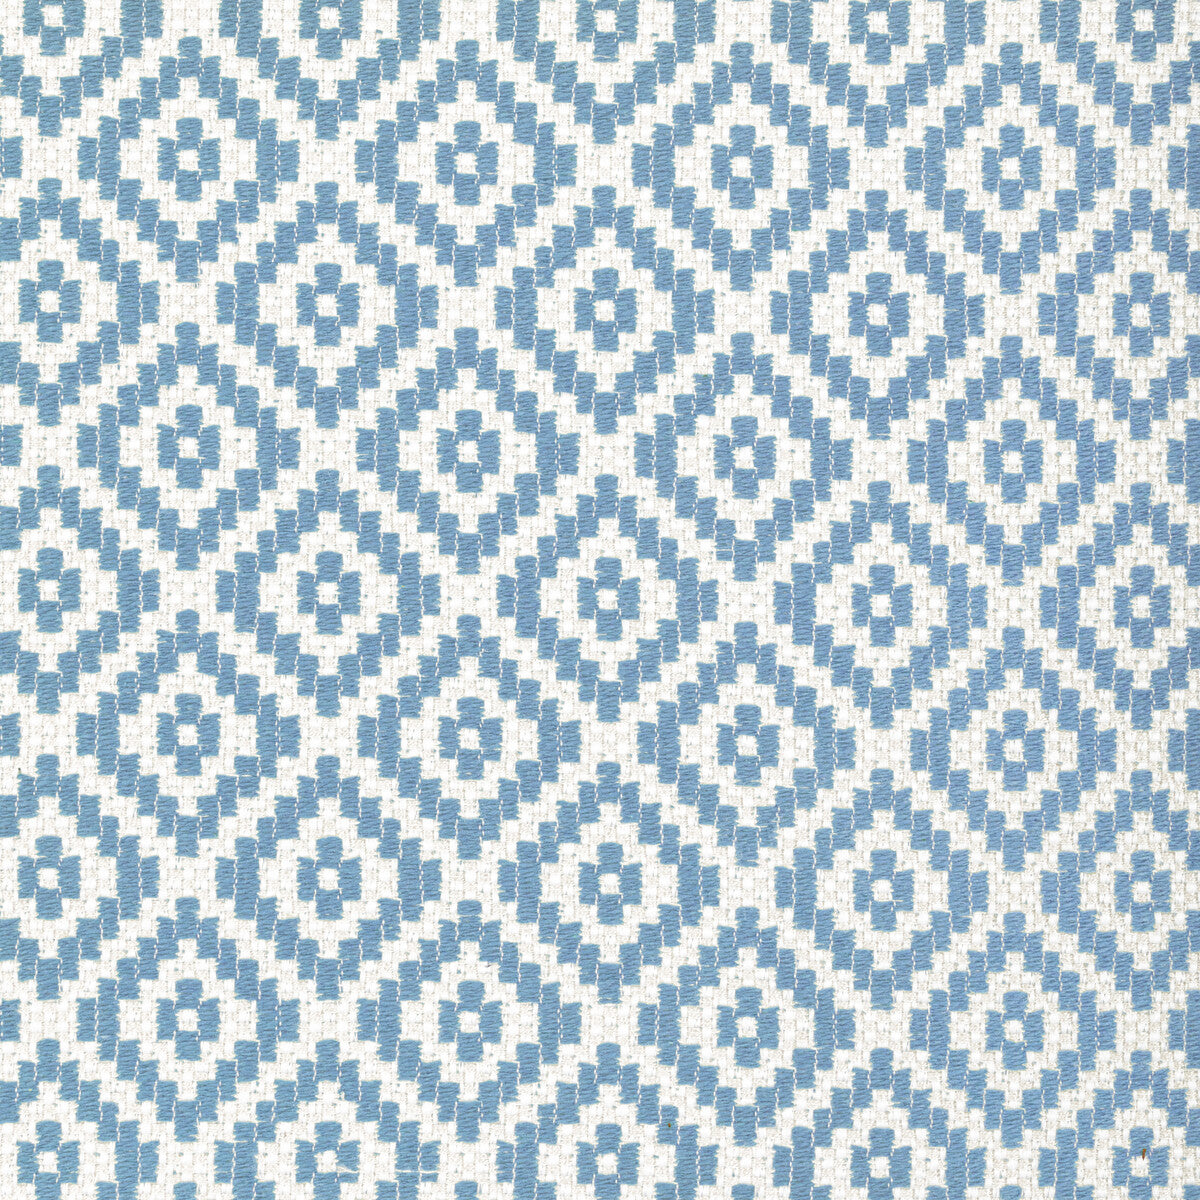 Kravet Design fabric in 36411-15 color - pattern 36411.15.0 - by Kravet Design in the Performance Crypton Home collection